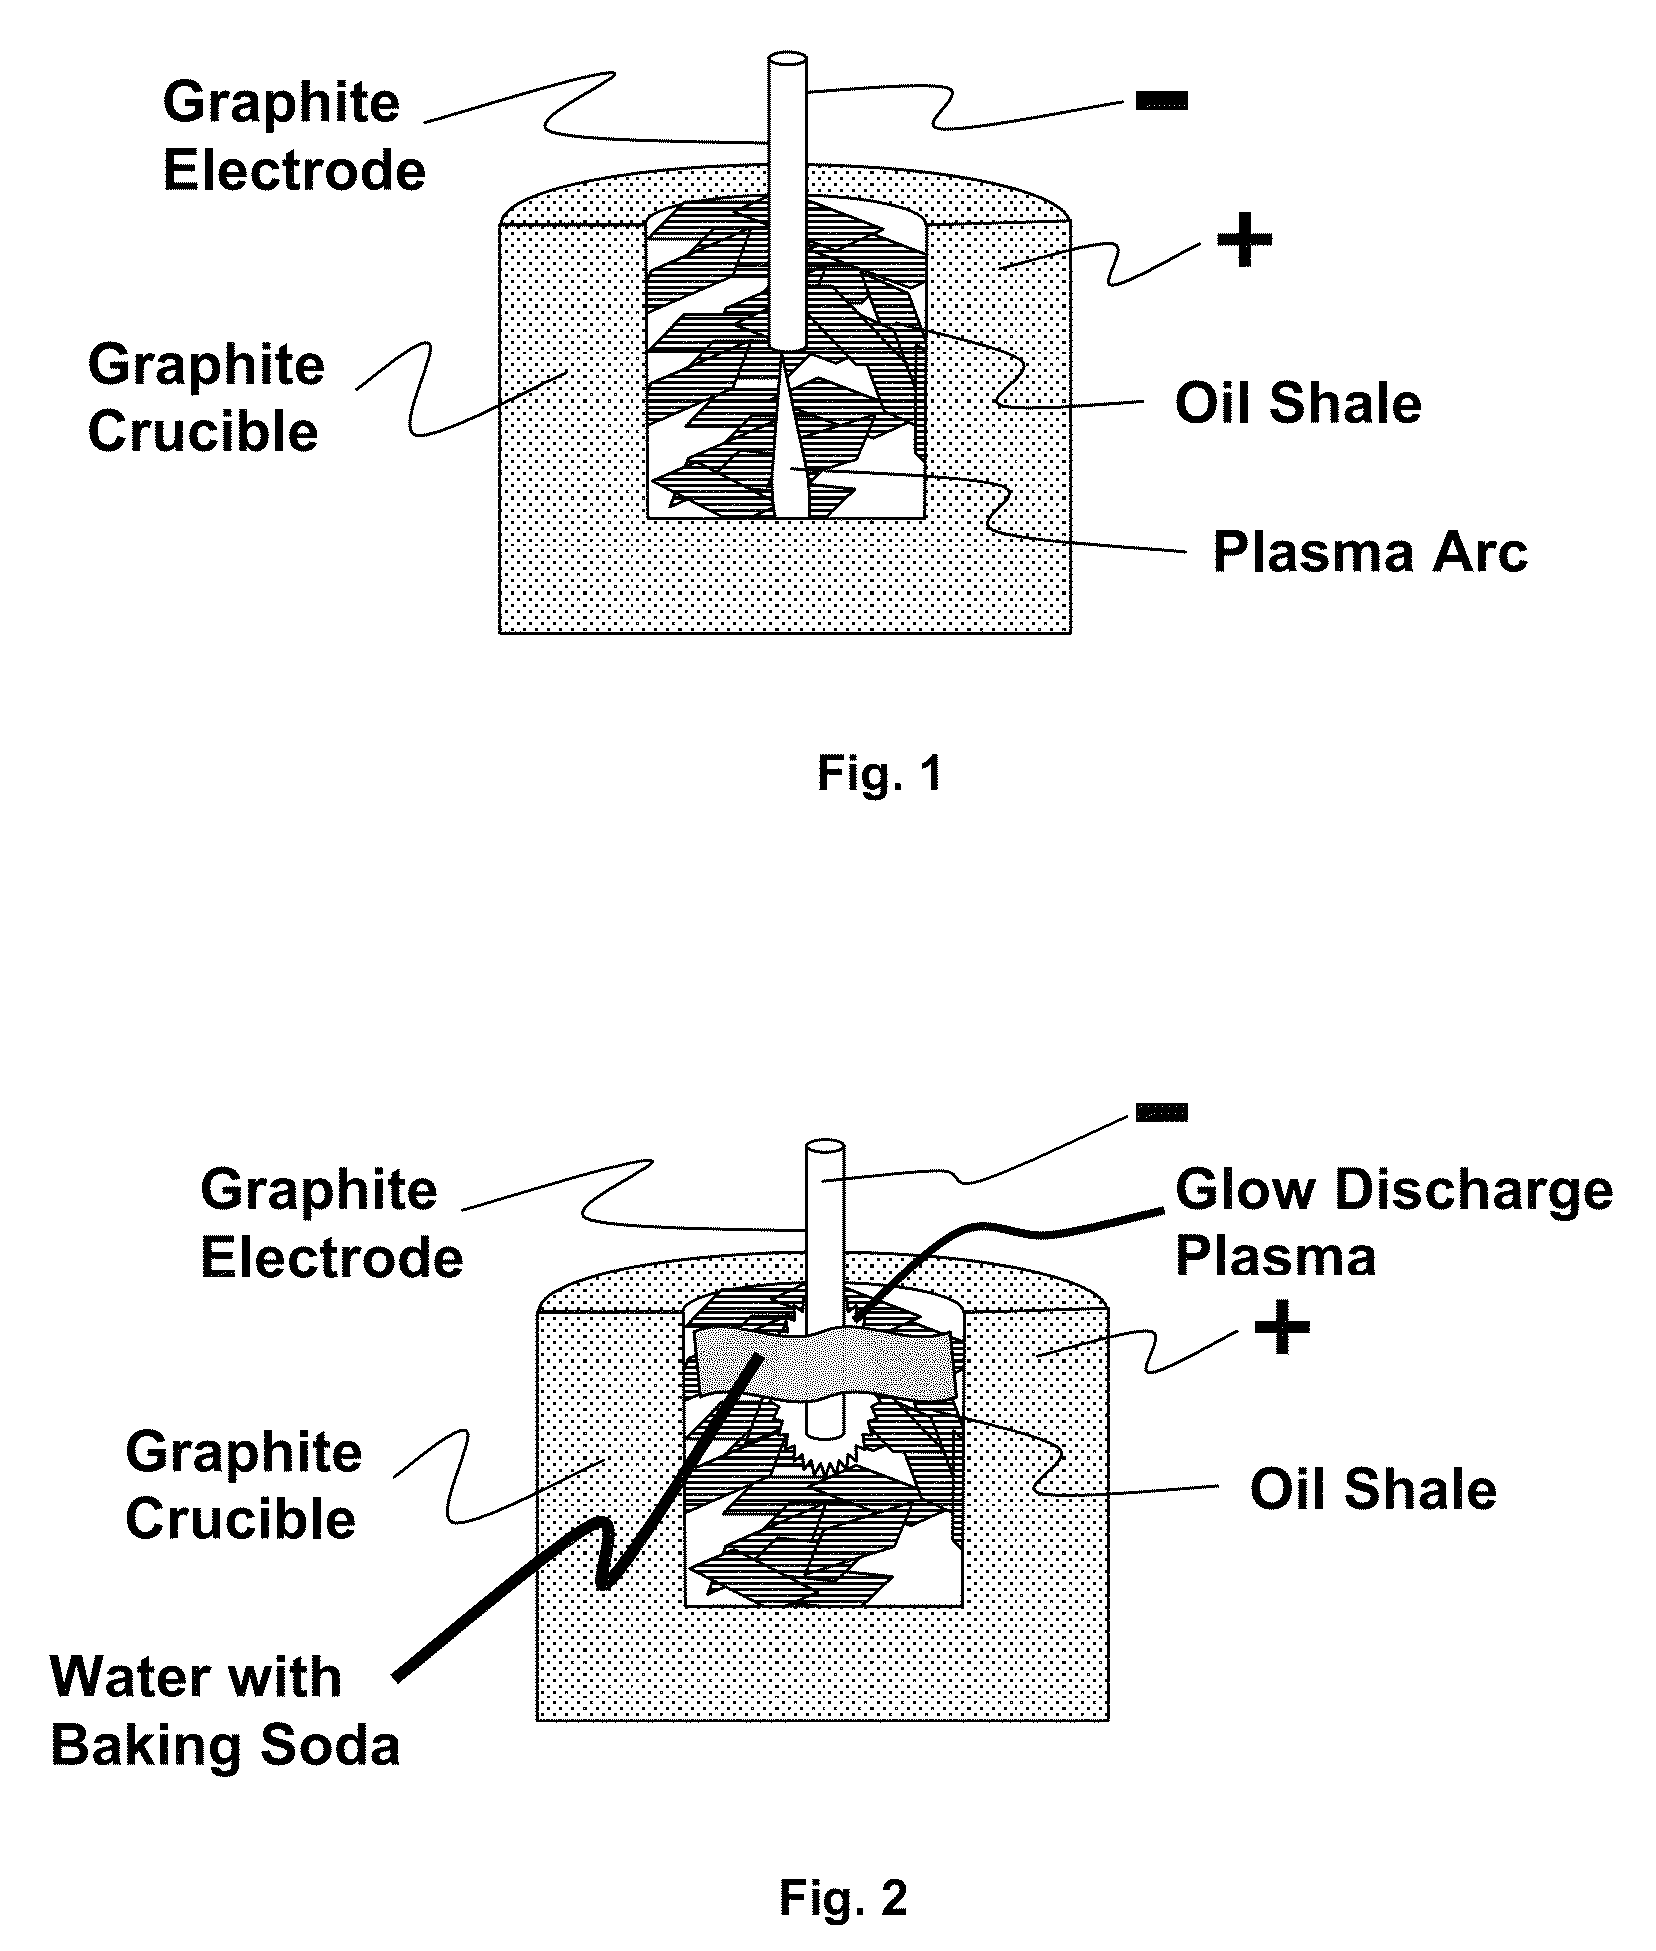 System, method and apparatus for creating an electrical glow discharge